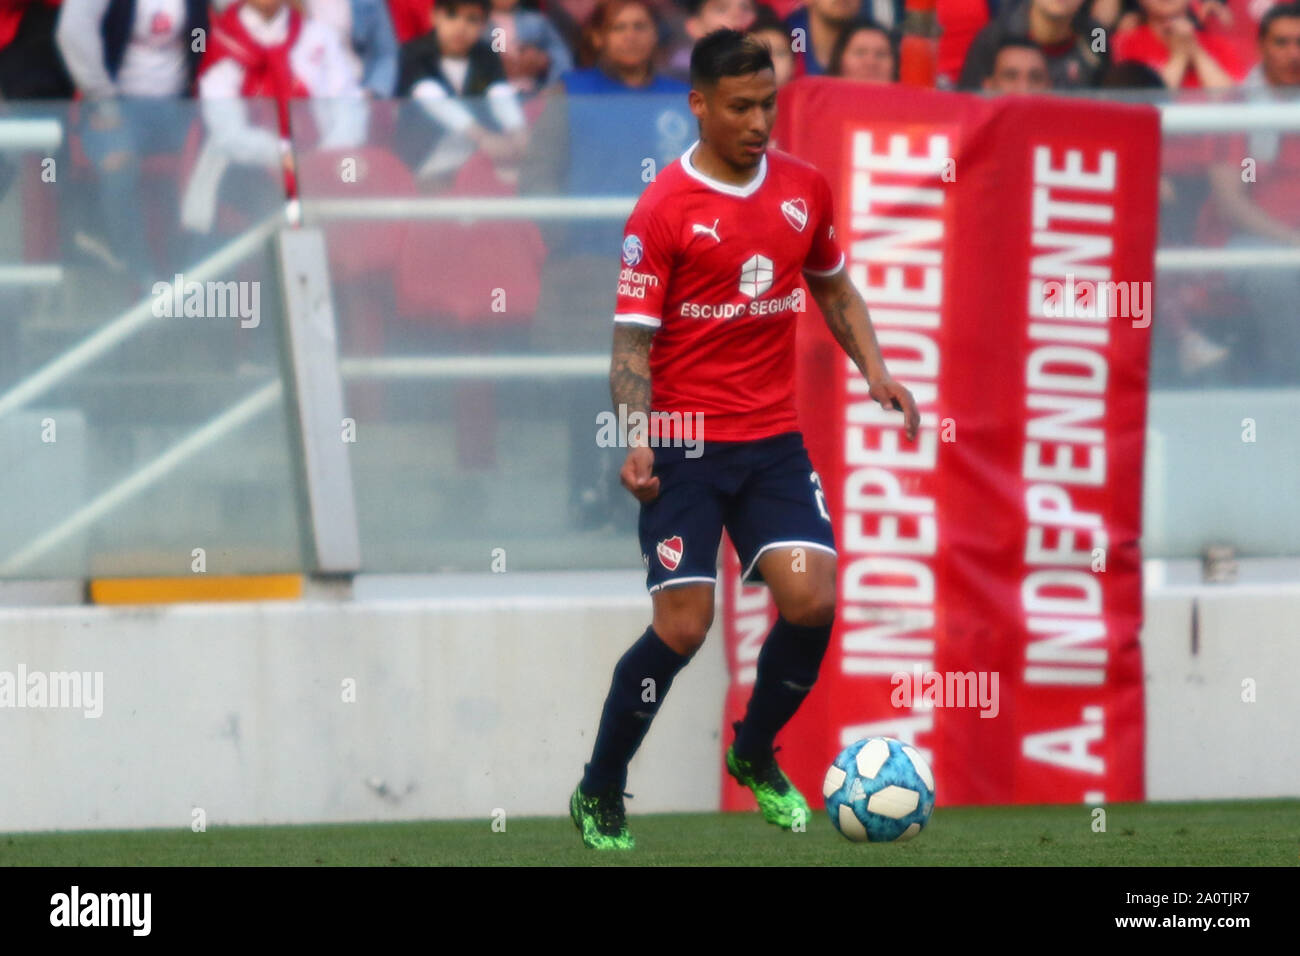 BUENOS AIRES, 14.09.2019: Domingo Blanco during the match between Independiente and Lanús at Libertadores de América Stadium in Buenos Aires, Argentin Stock Photo